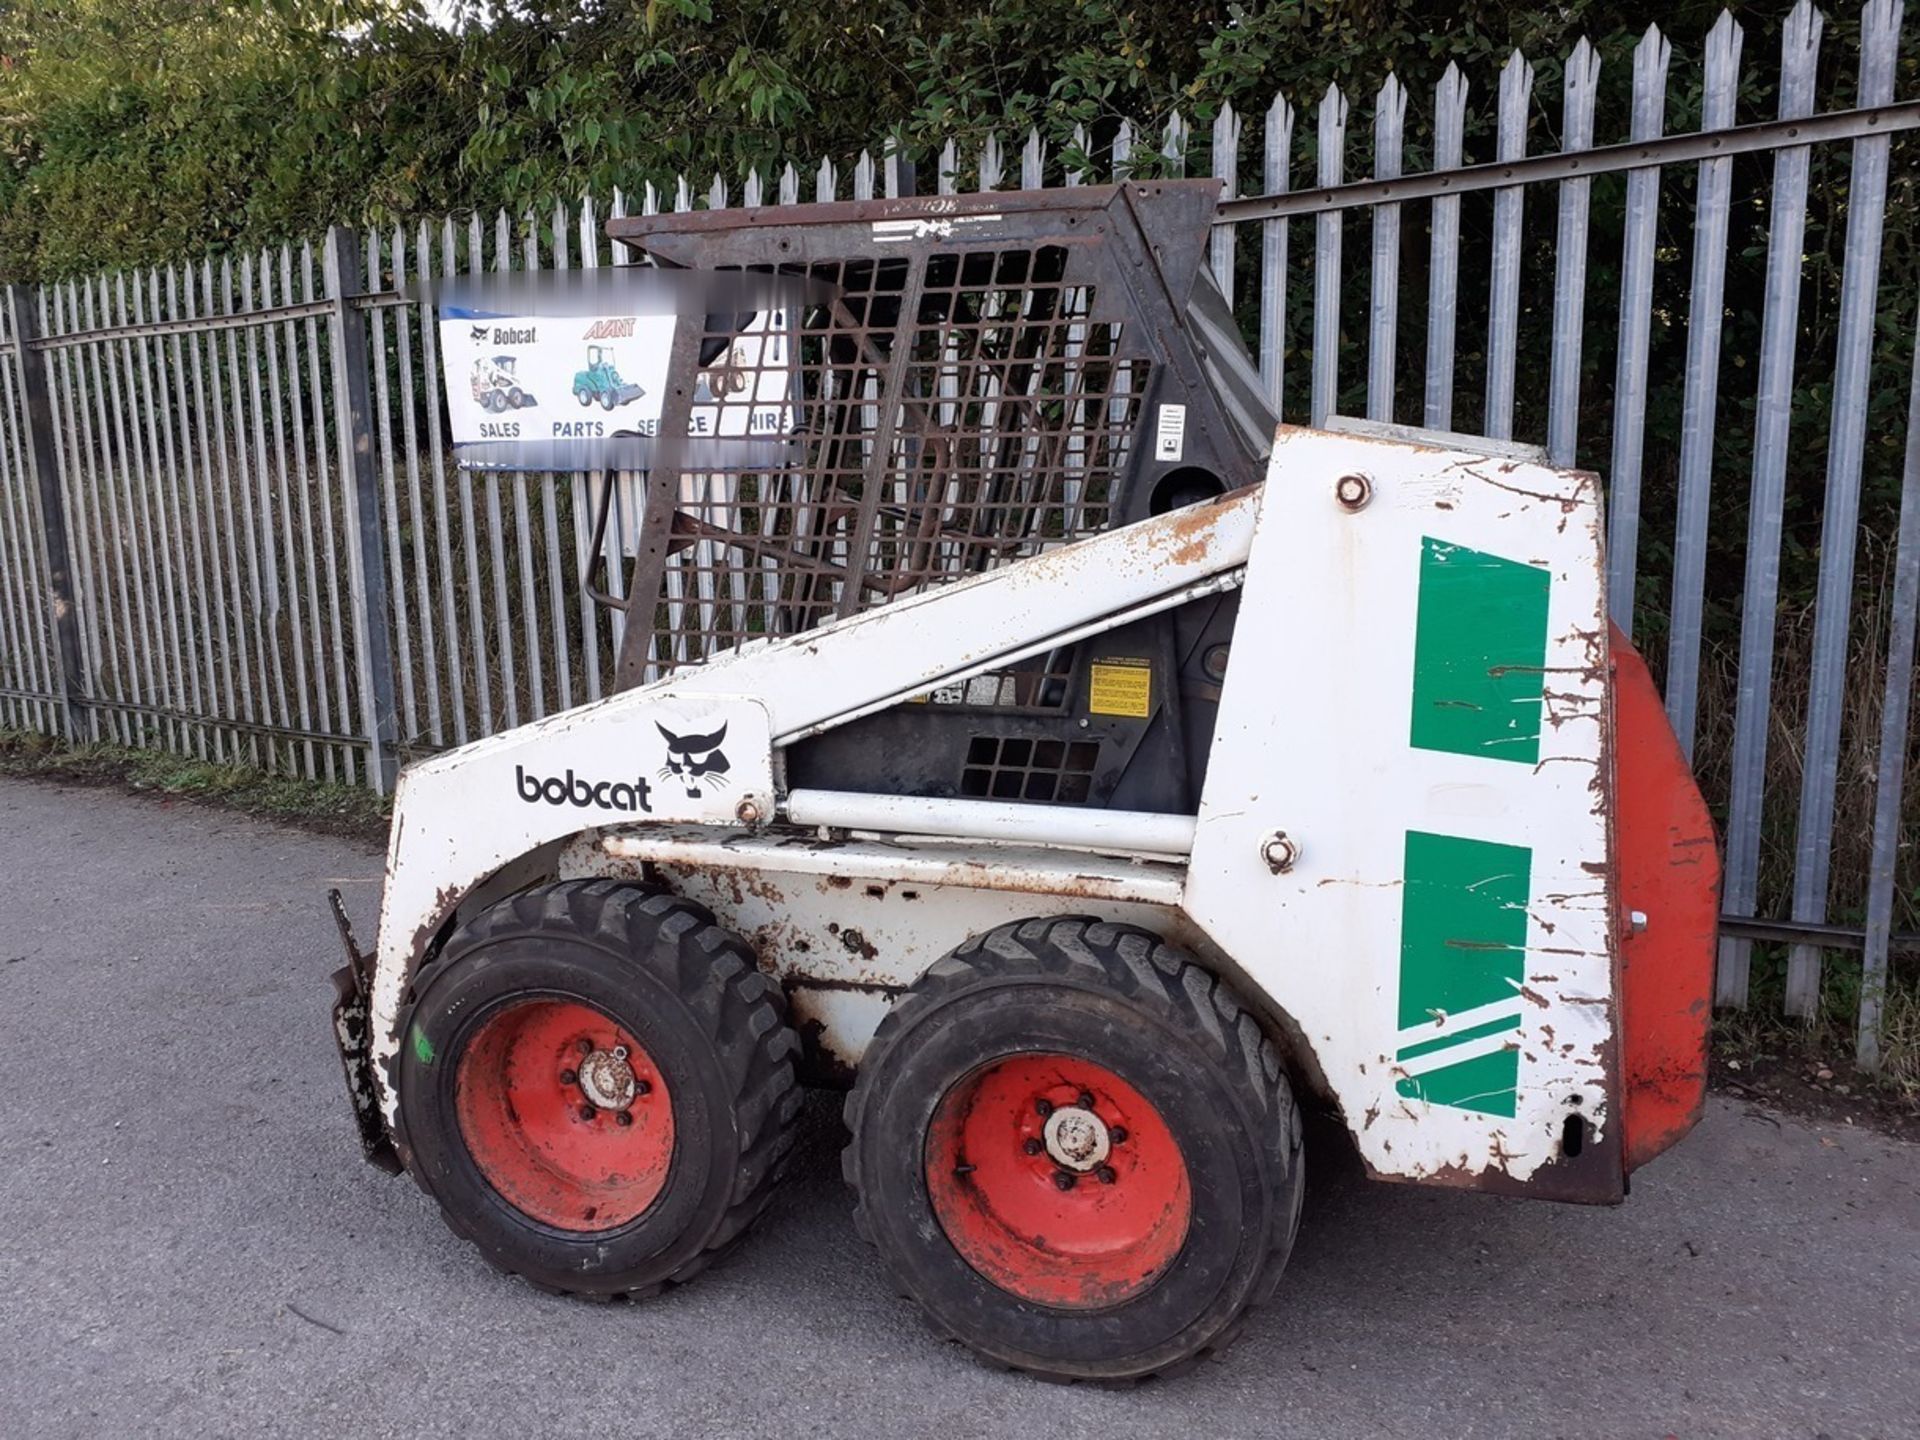 BOBCAT 643 SKID STEER, 5444 HOURS, USED CONDITION - STRAIGHT OFF A FARM *PLUS VAT* - Image 5 of 6